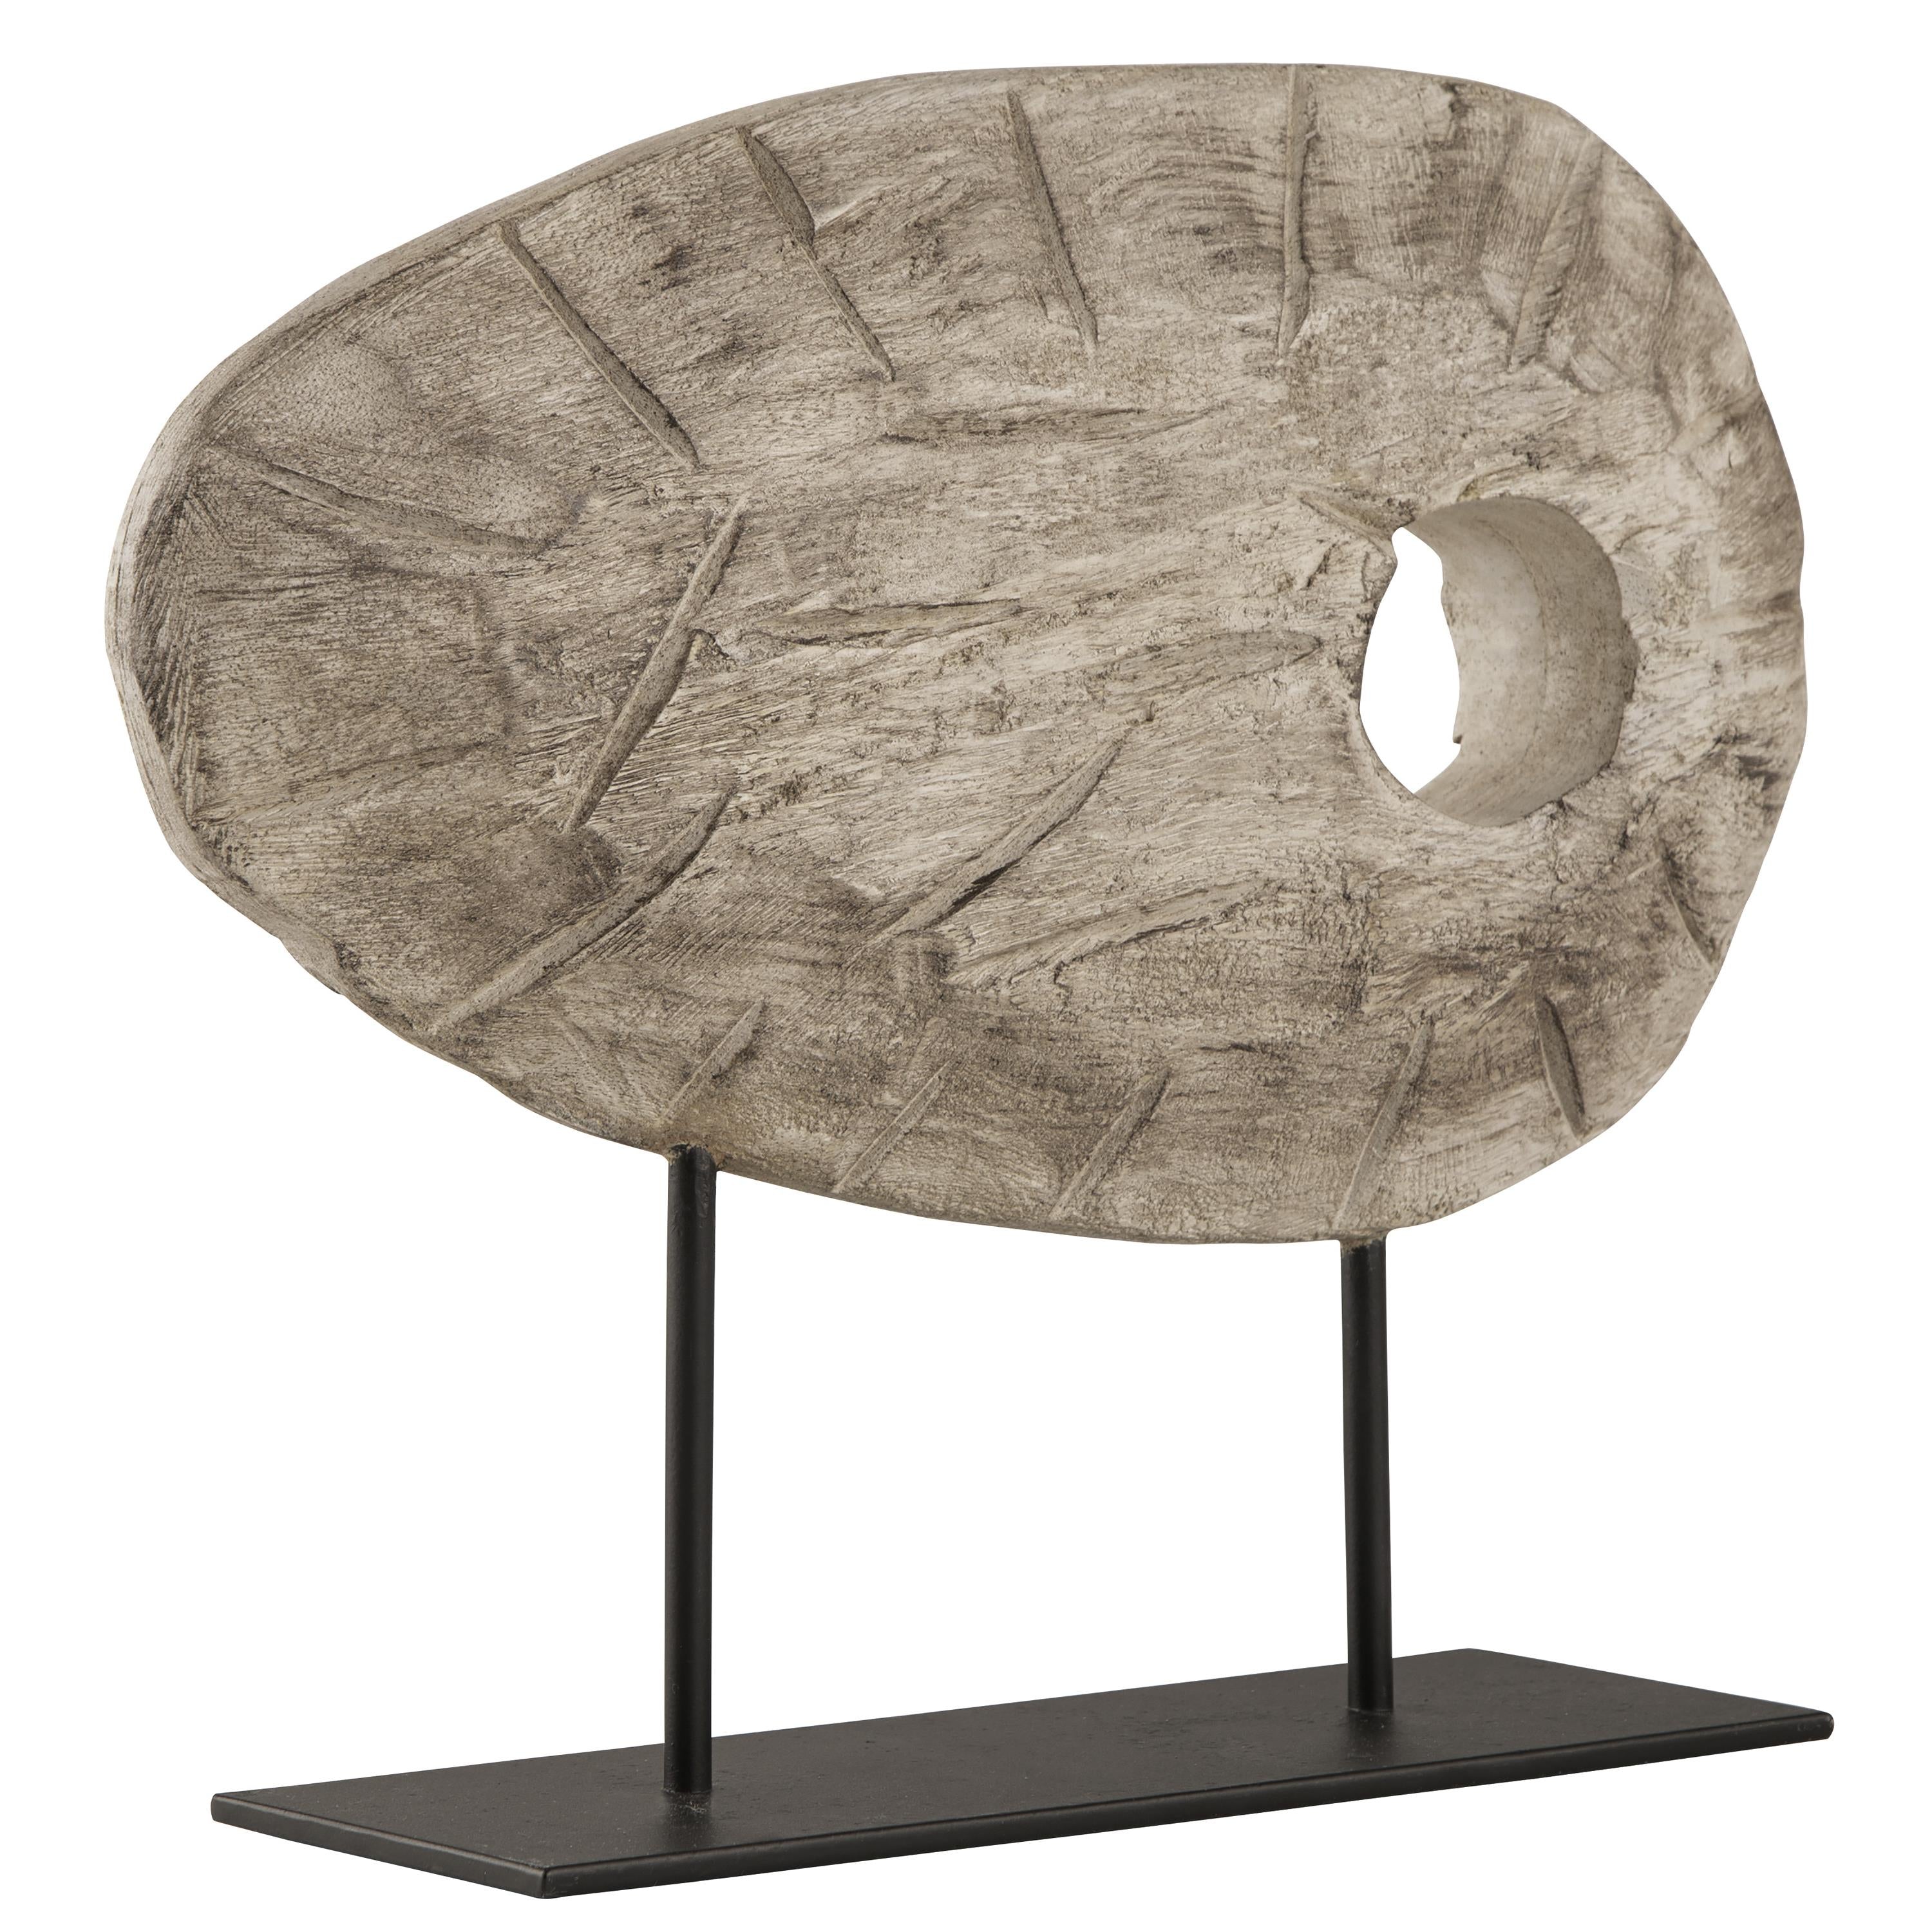 Signature Design by Ashley Sculptures Tabletop A2000561 IMAGE 2